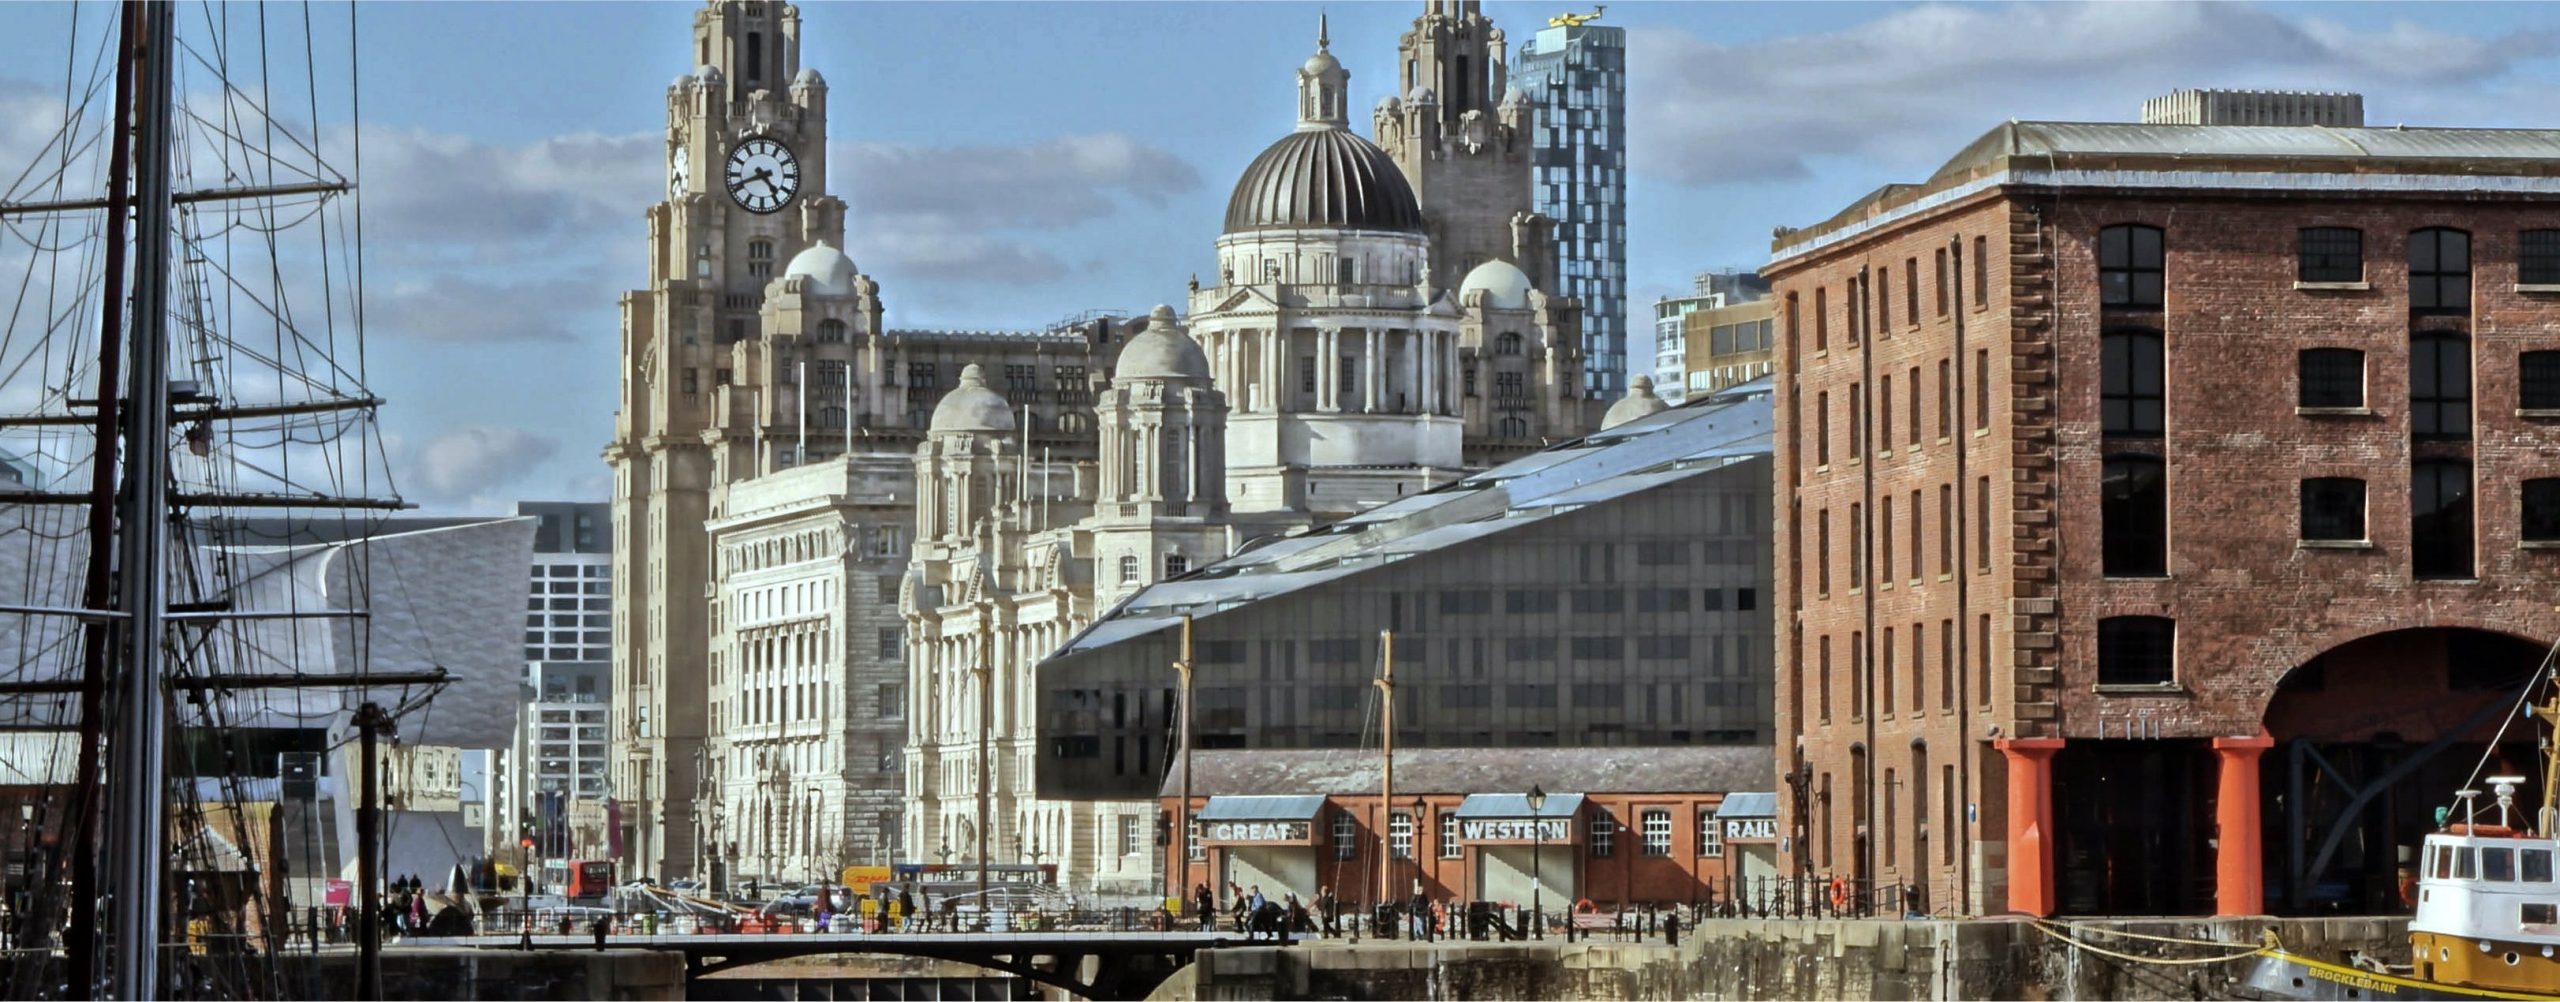 How Disc supports a sensitive approach in Liverpool